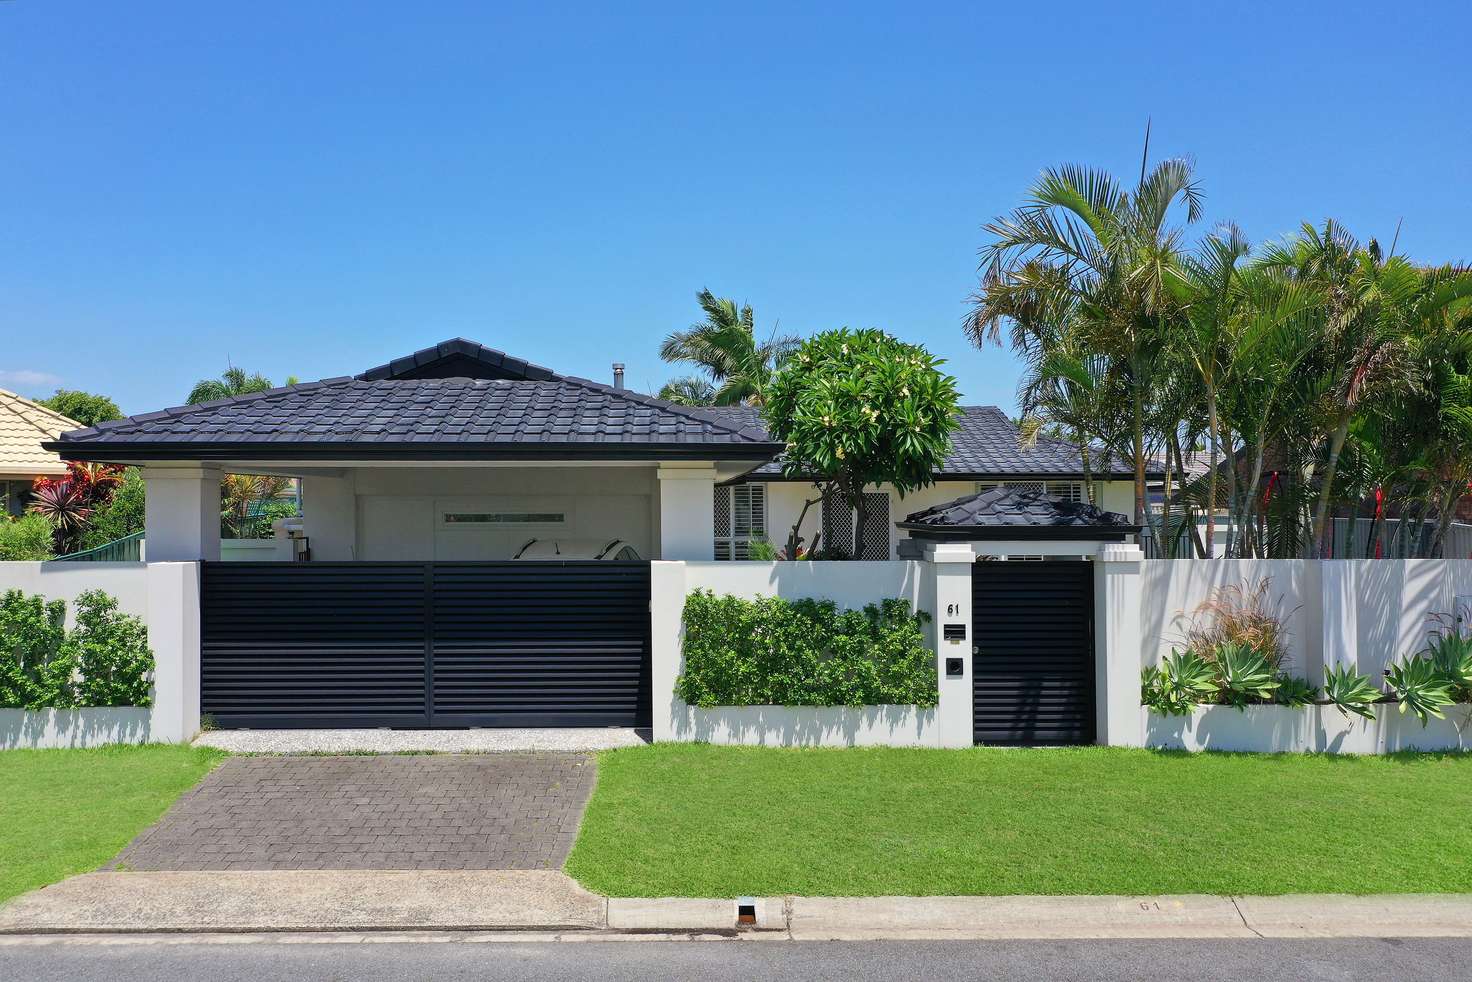 Main view of Homely house listing, 61 Dunlin Drive, Burleigh Waters QLD 4220